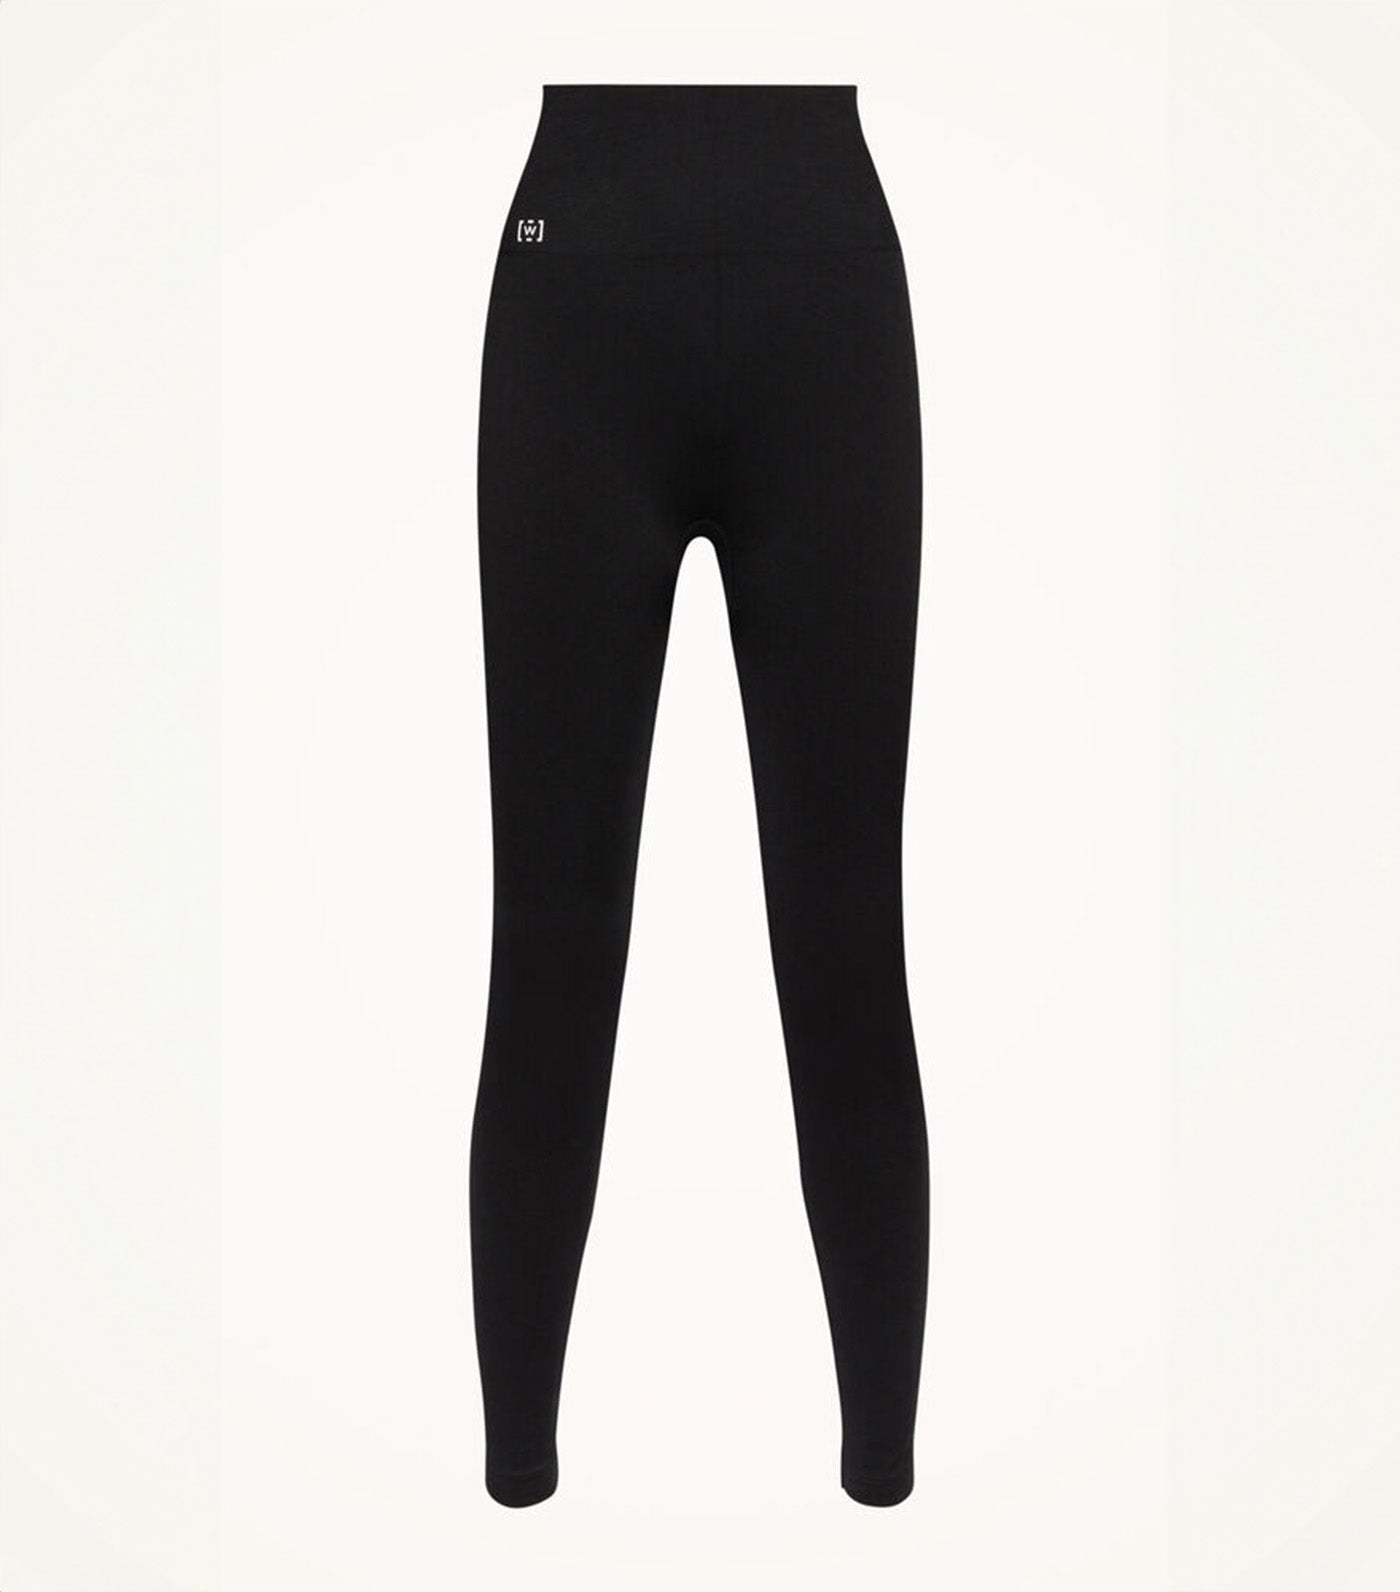 Body shaping leggings by Wolford